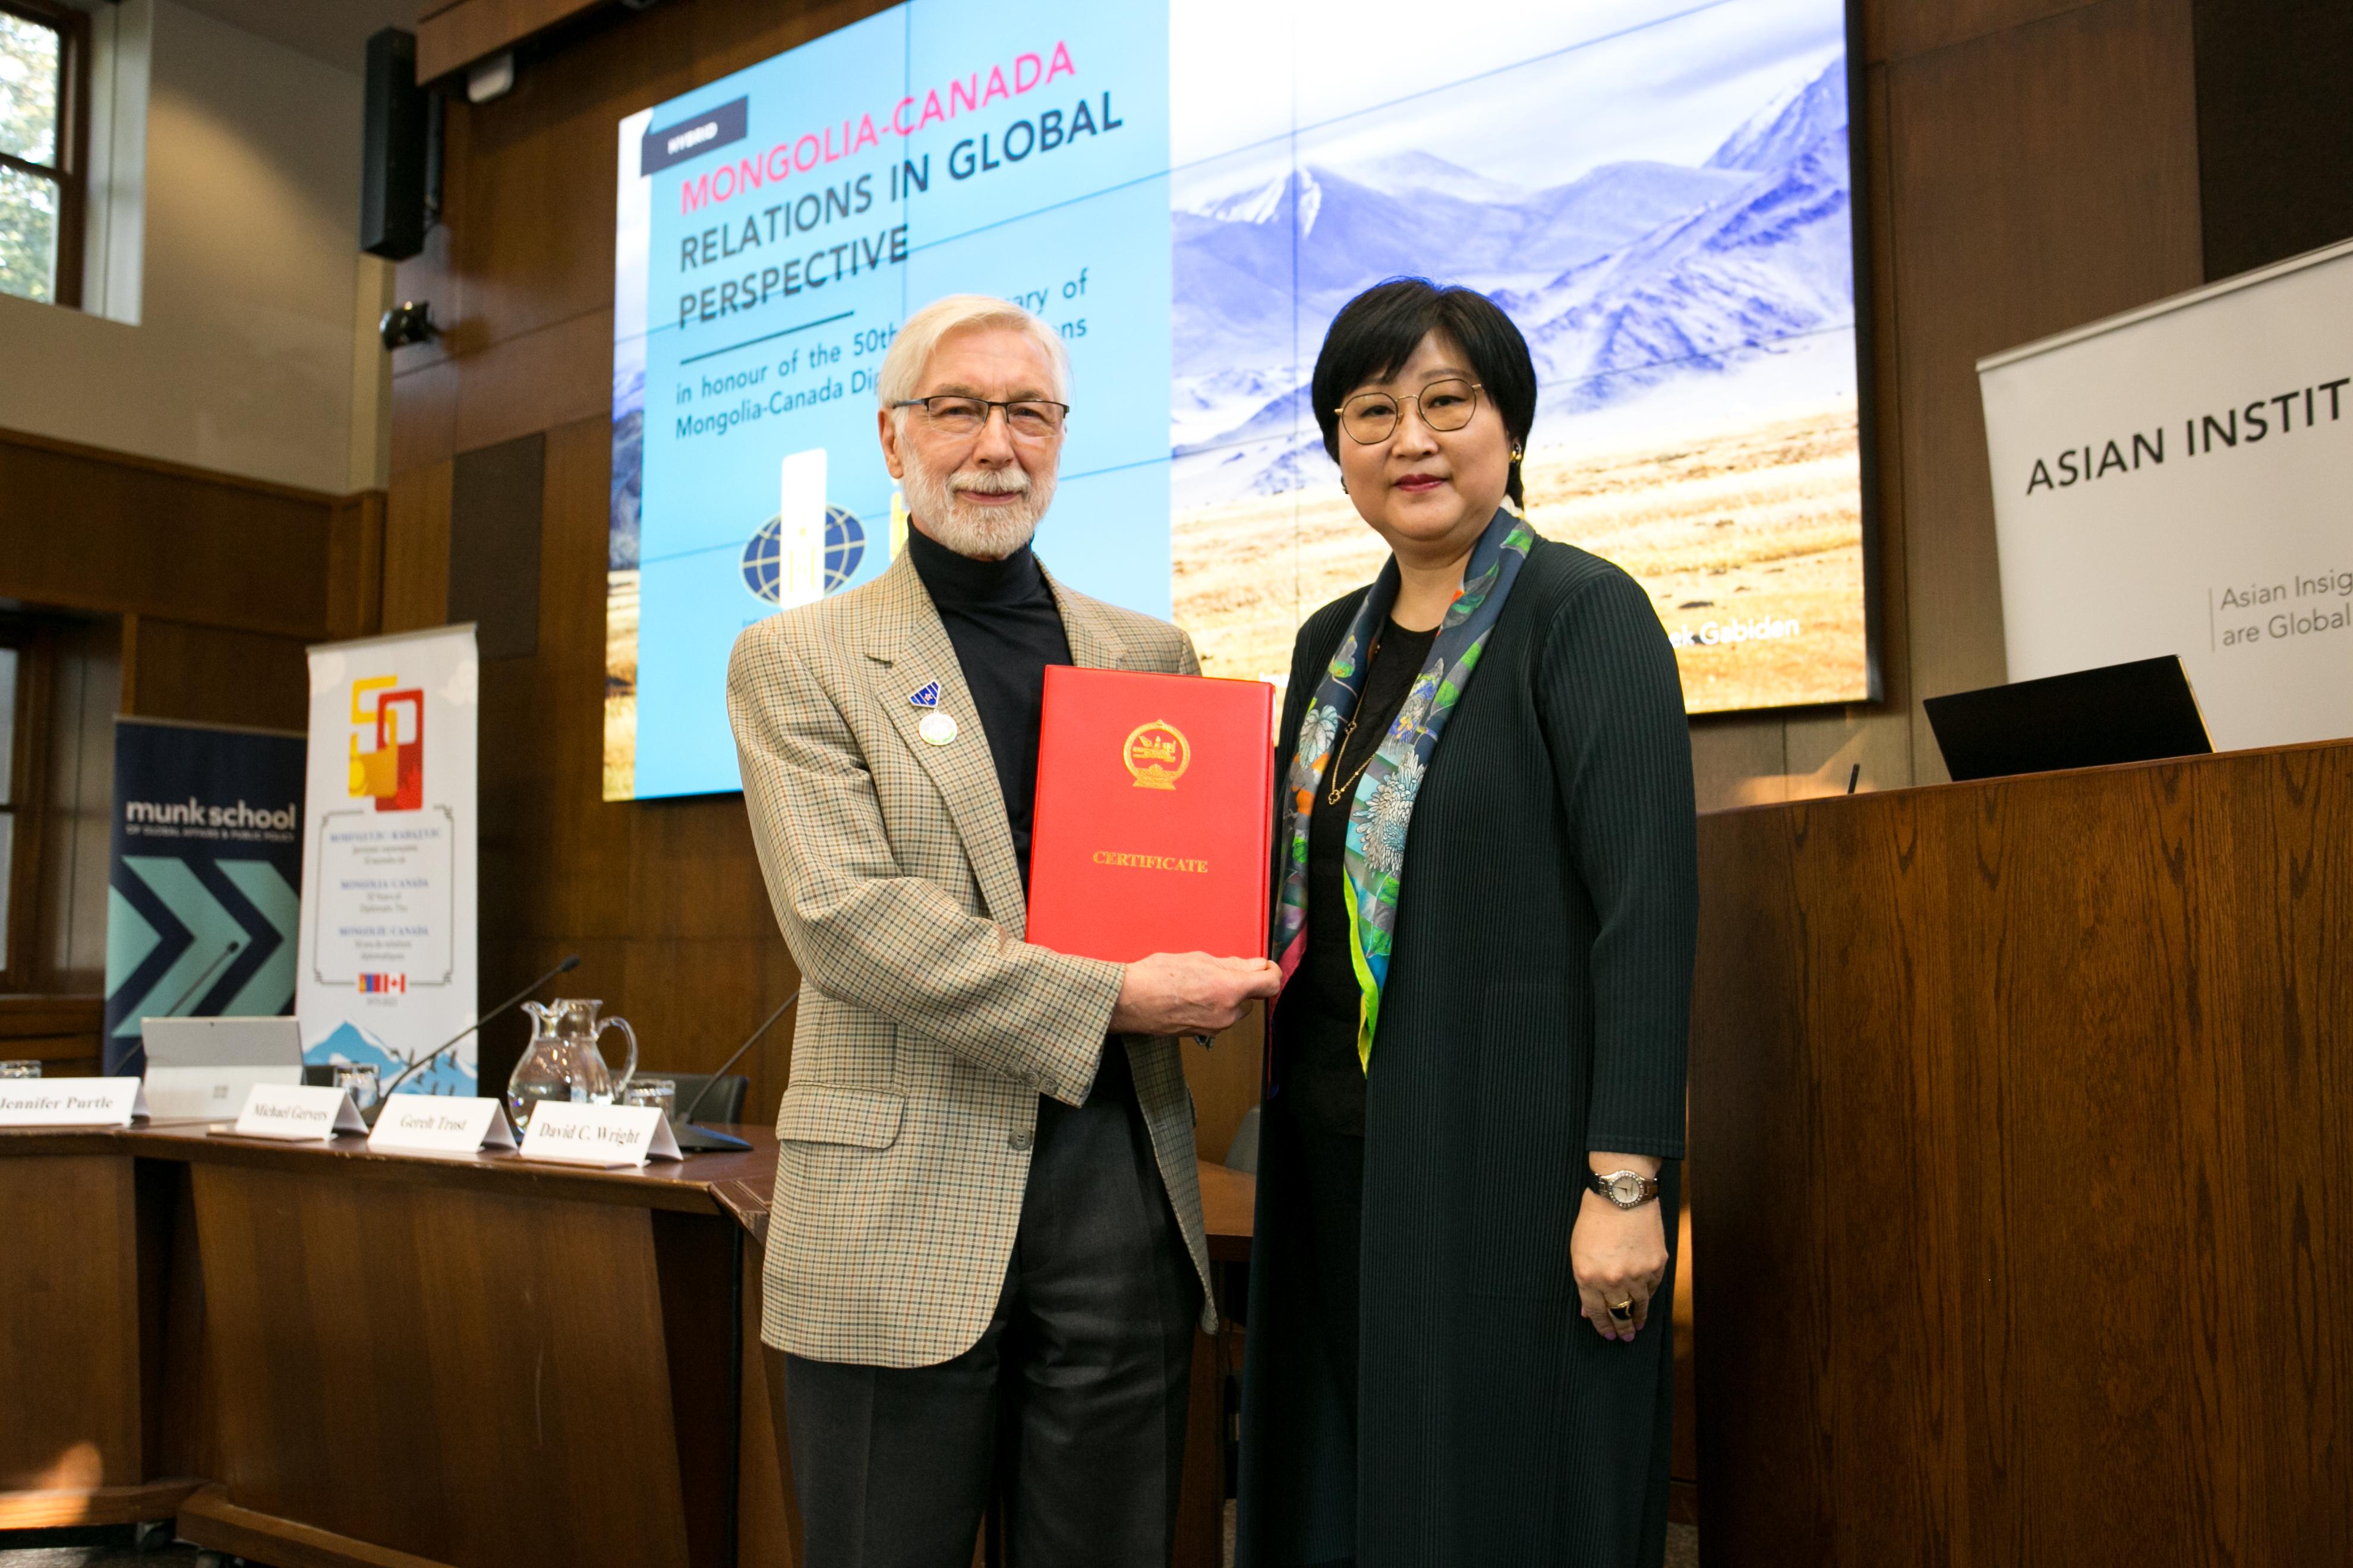 Professor Michael Gervers posing for a photo with Mongolian Ambassador Madam Sarantogos Erdenetsogt while holding the certificate for the Medal of Friendship 